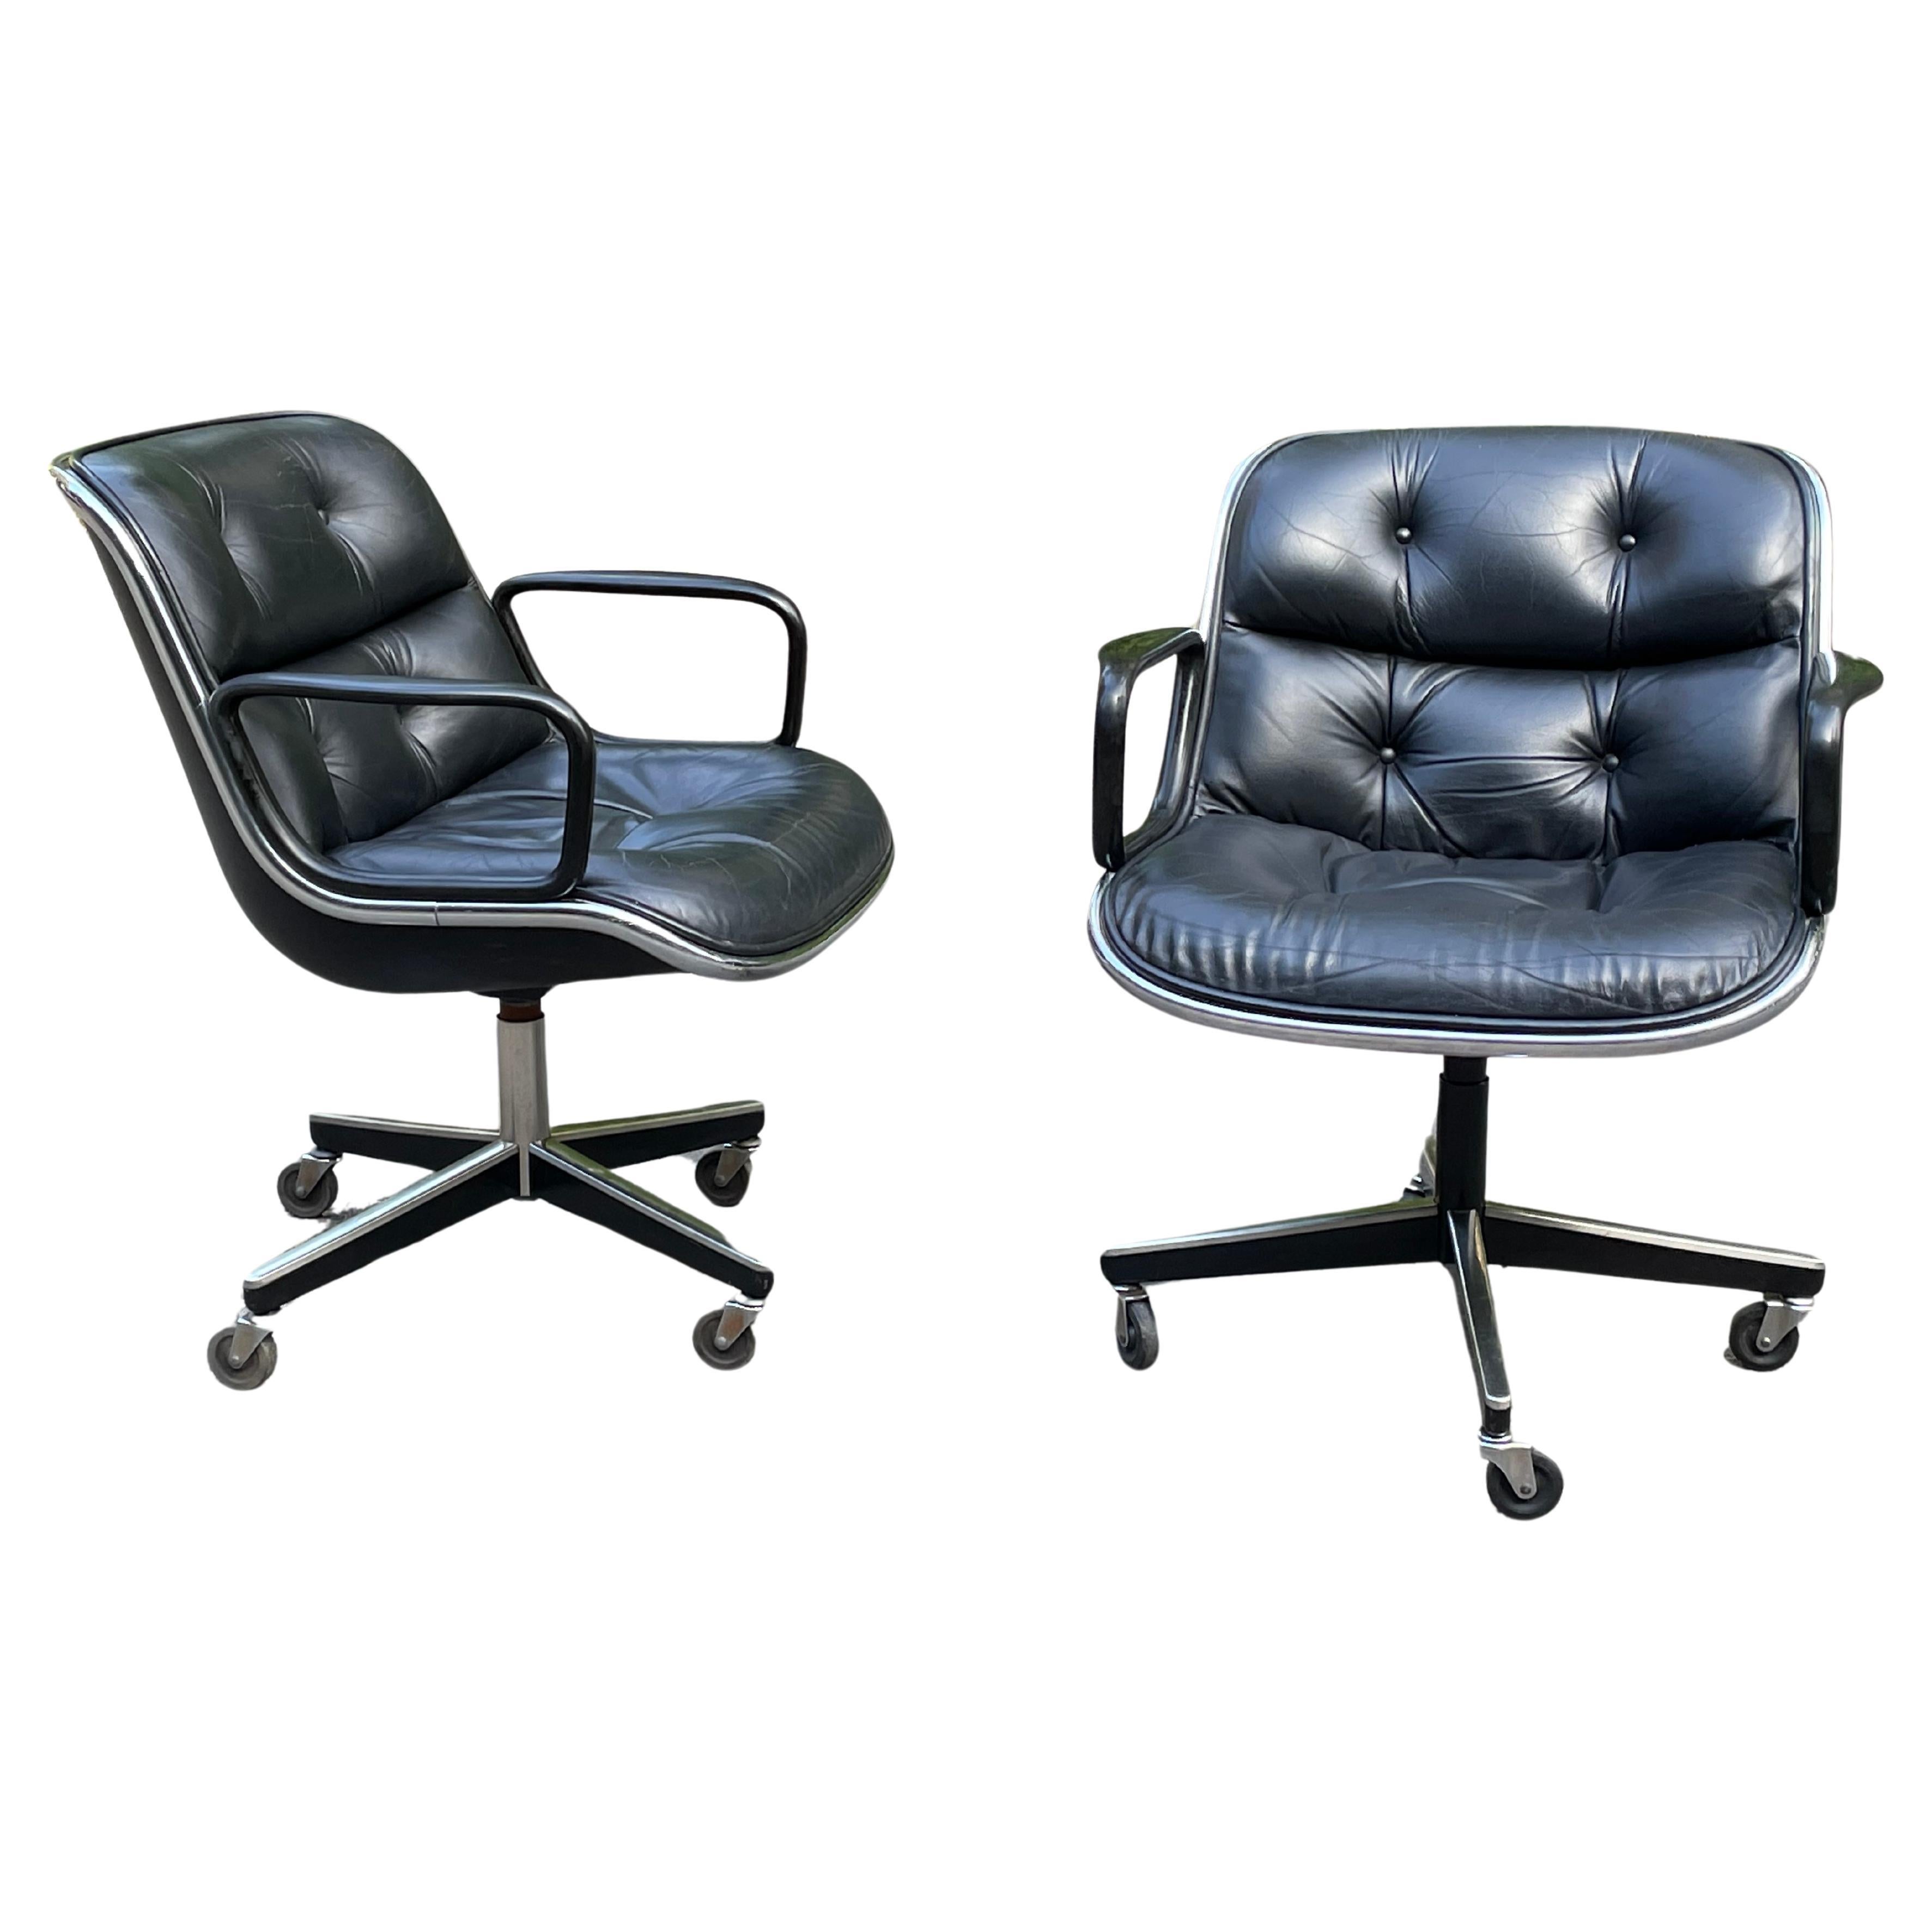 Mid-Century Modern Vintage Knoll Pollock Chairs in Black Leather - Pair